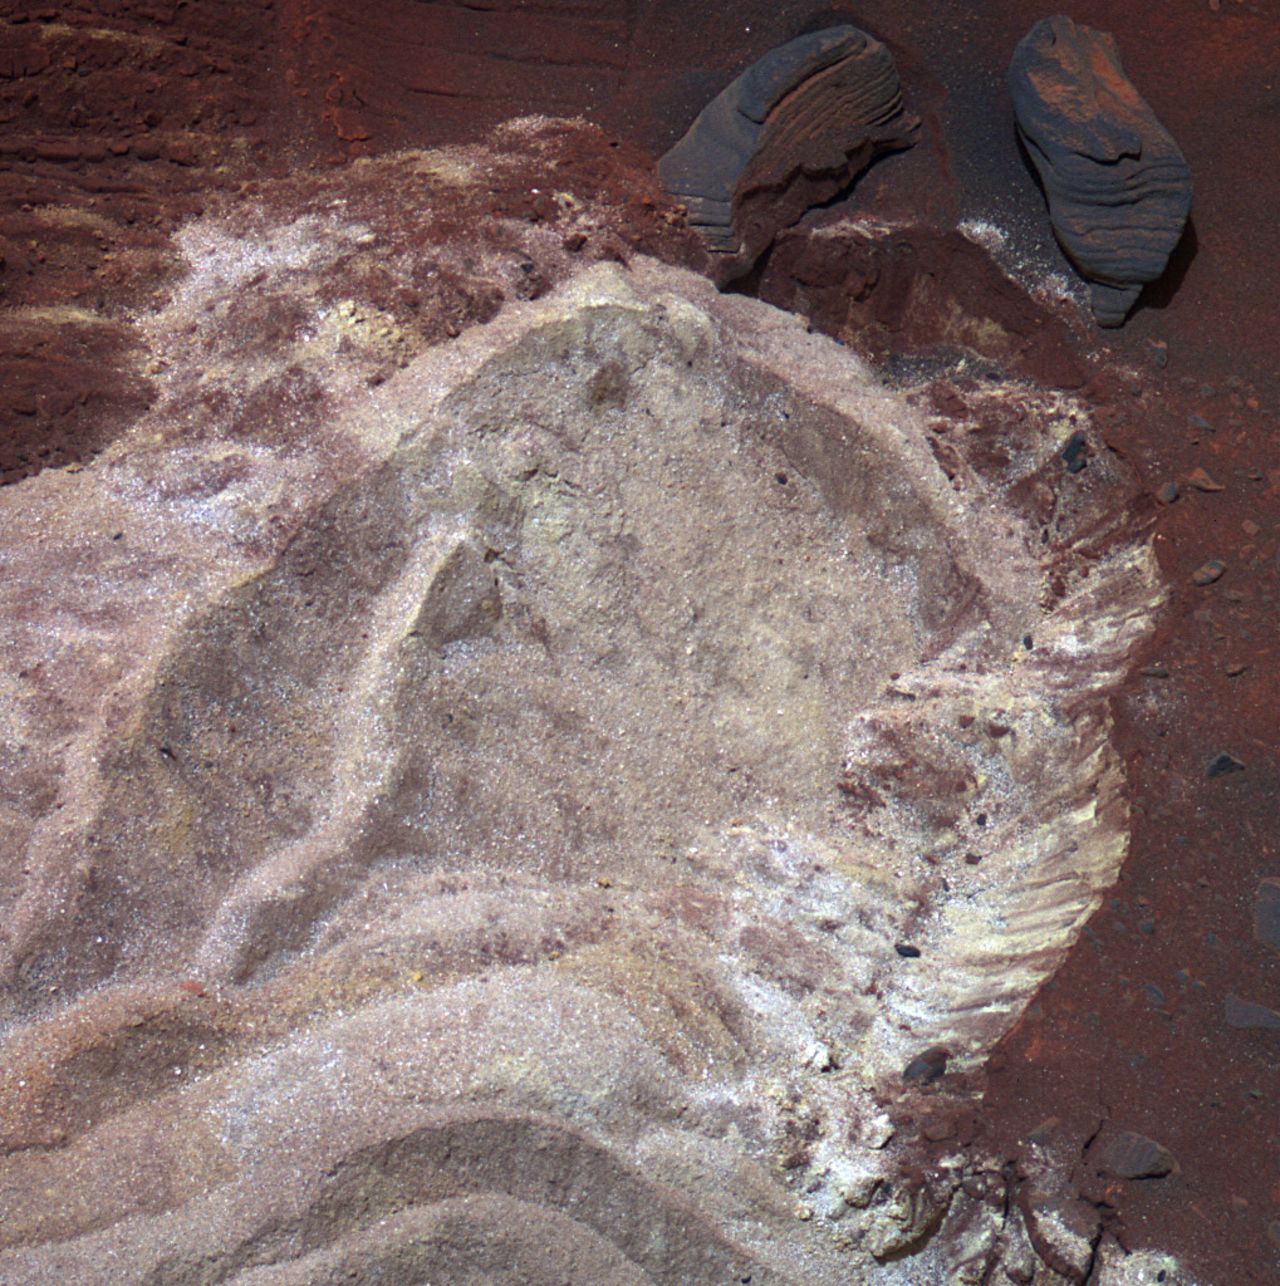 Soft soil is exposed when the wheels of NASA's Mars Exploration Rover Spirit dig into a patch of ground dubbed Troy in 2009.